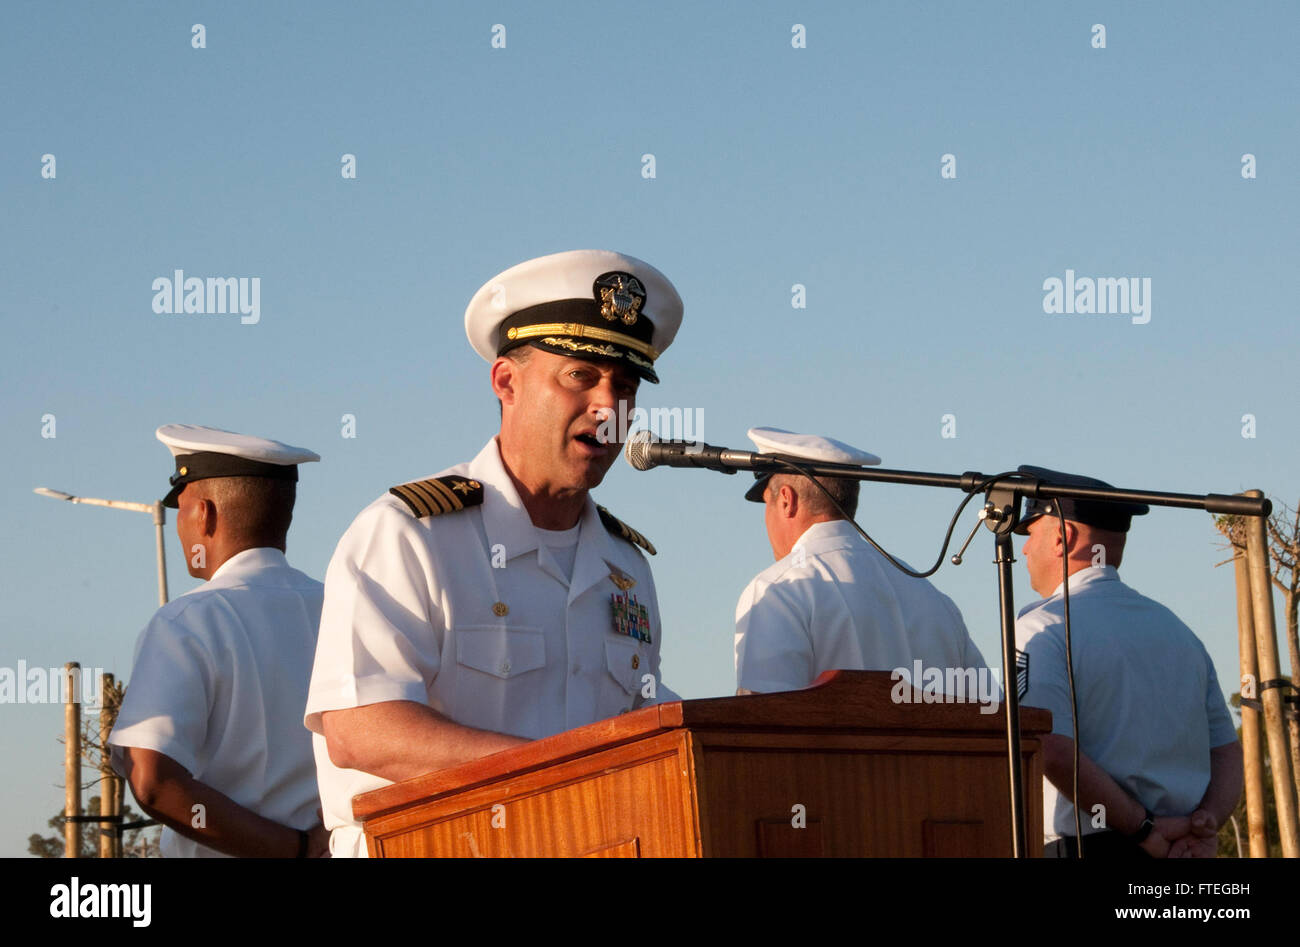 NAVAL STATION ROTA, Spain (July 2, 2015) – Capt. Greg Pekari, commander, U.S. Naval Activities Spain, speaks of the importance of Independence Day to service members, civilians, and guests during the annual flag-raising ceremony, July 2. While raising the flag is a daily occurrence on most U.S. military installations around the world, Naval Station Rota is only permitted to fly the American flag with special permission from the base’s Spanish admiral in chief in accordance with the Agreement on Defense Cooperation.  (U.S. Navy photo by Mass Communication Specialist 2nd Class Grant Wamack/Relea Stock Photo